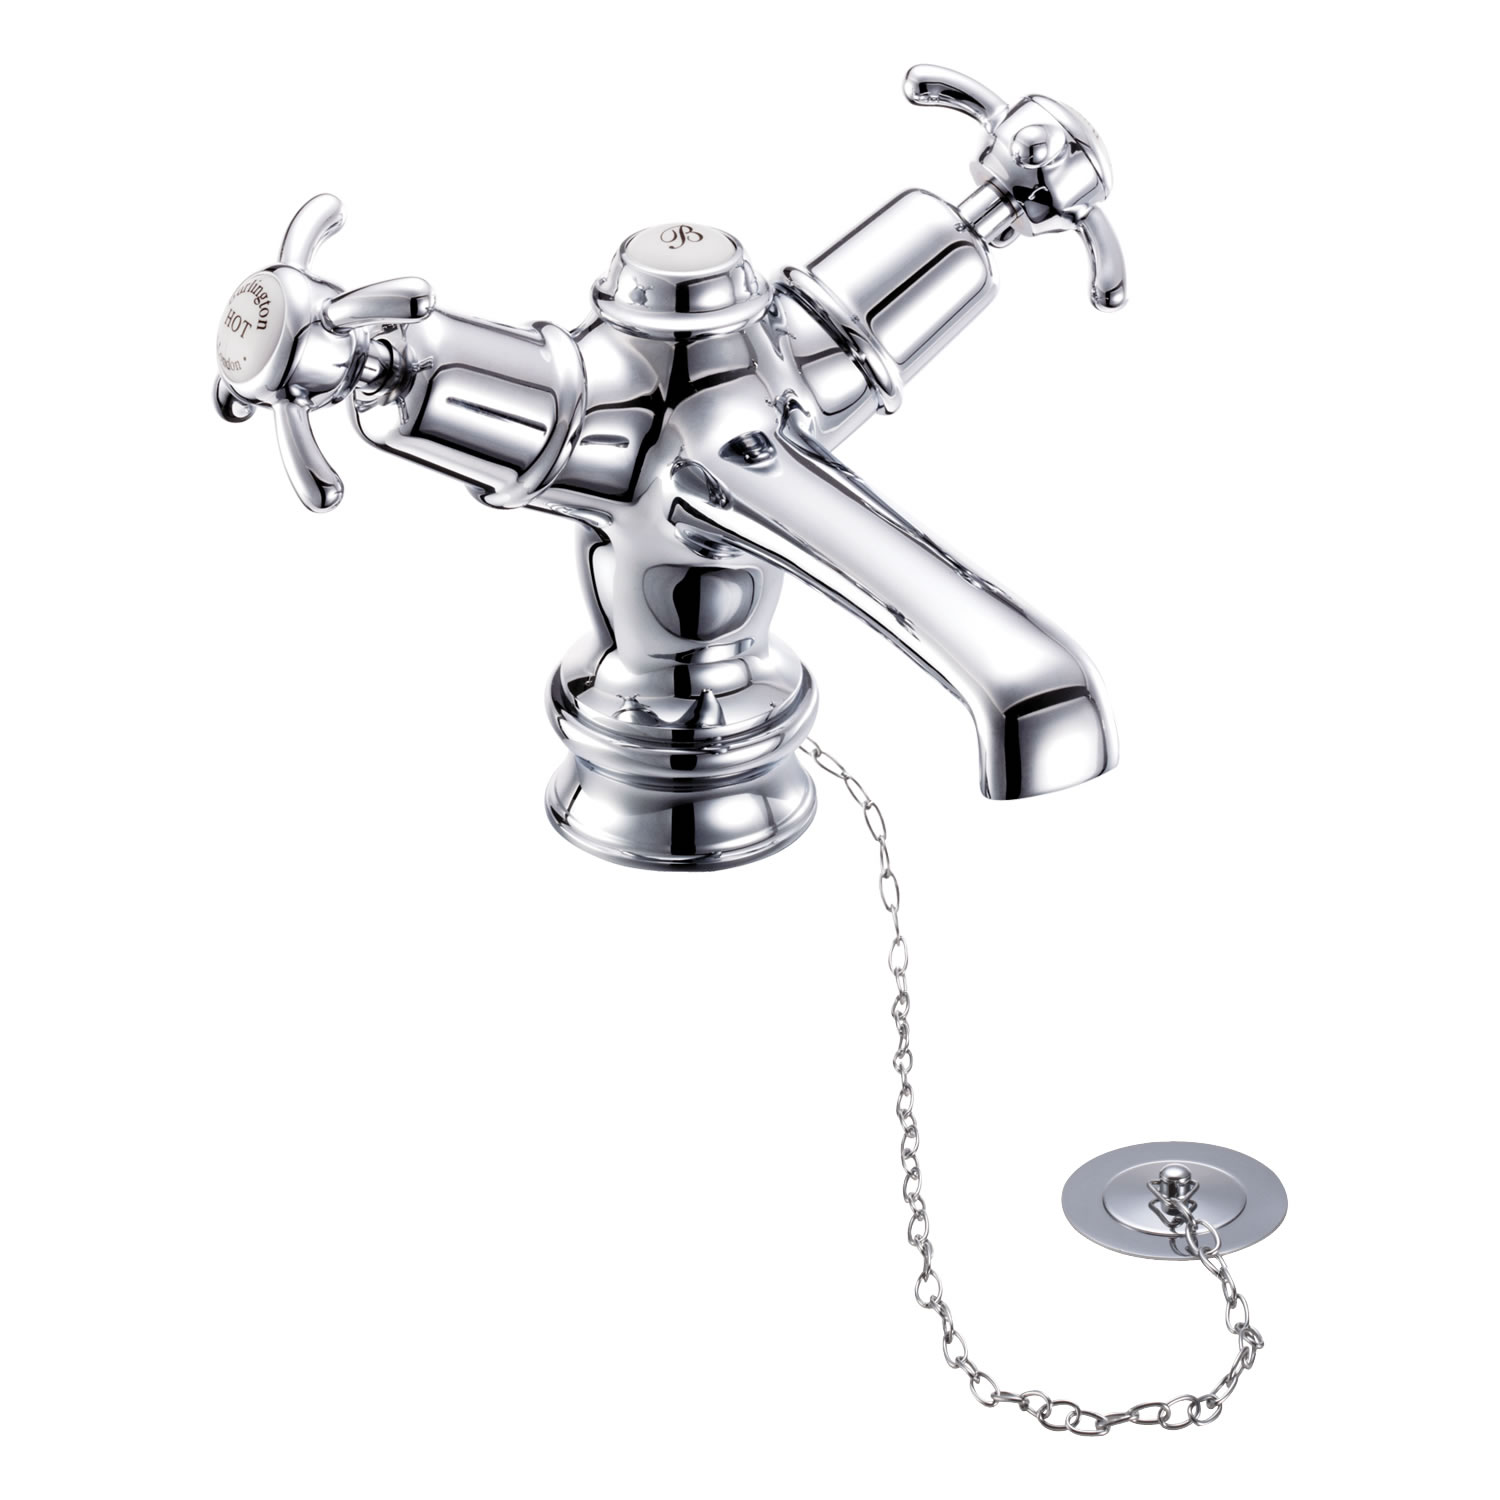 Anglesey Regent basin mixer with low central indice with plug and chain waste